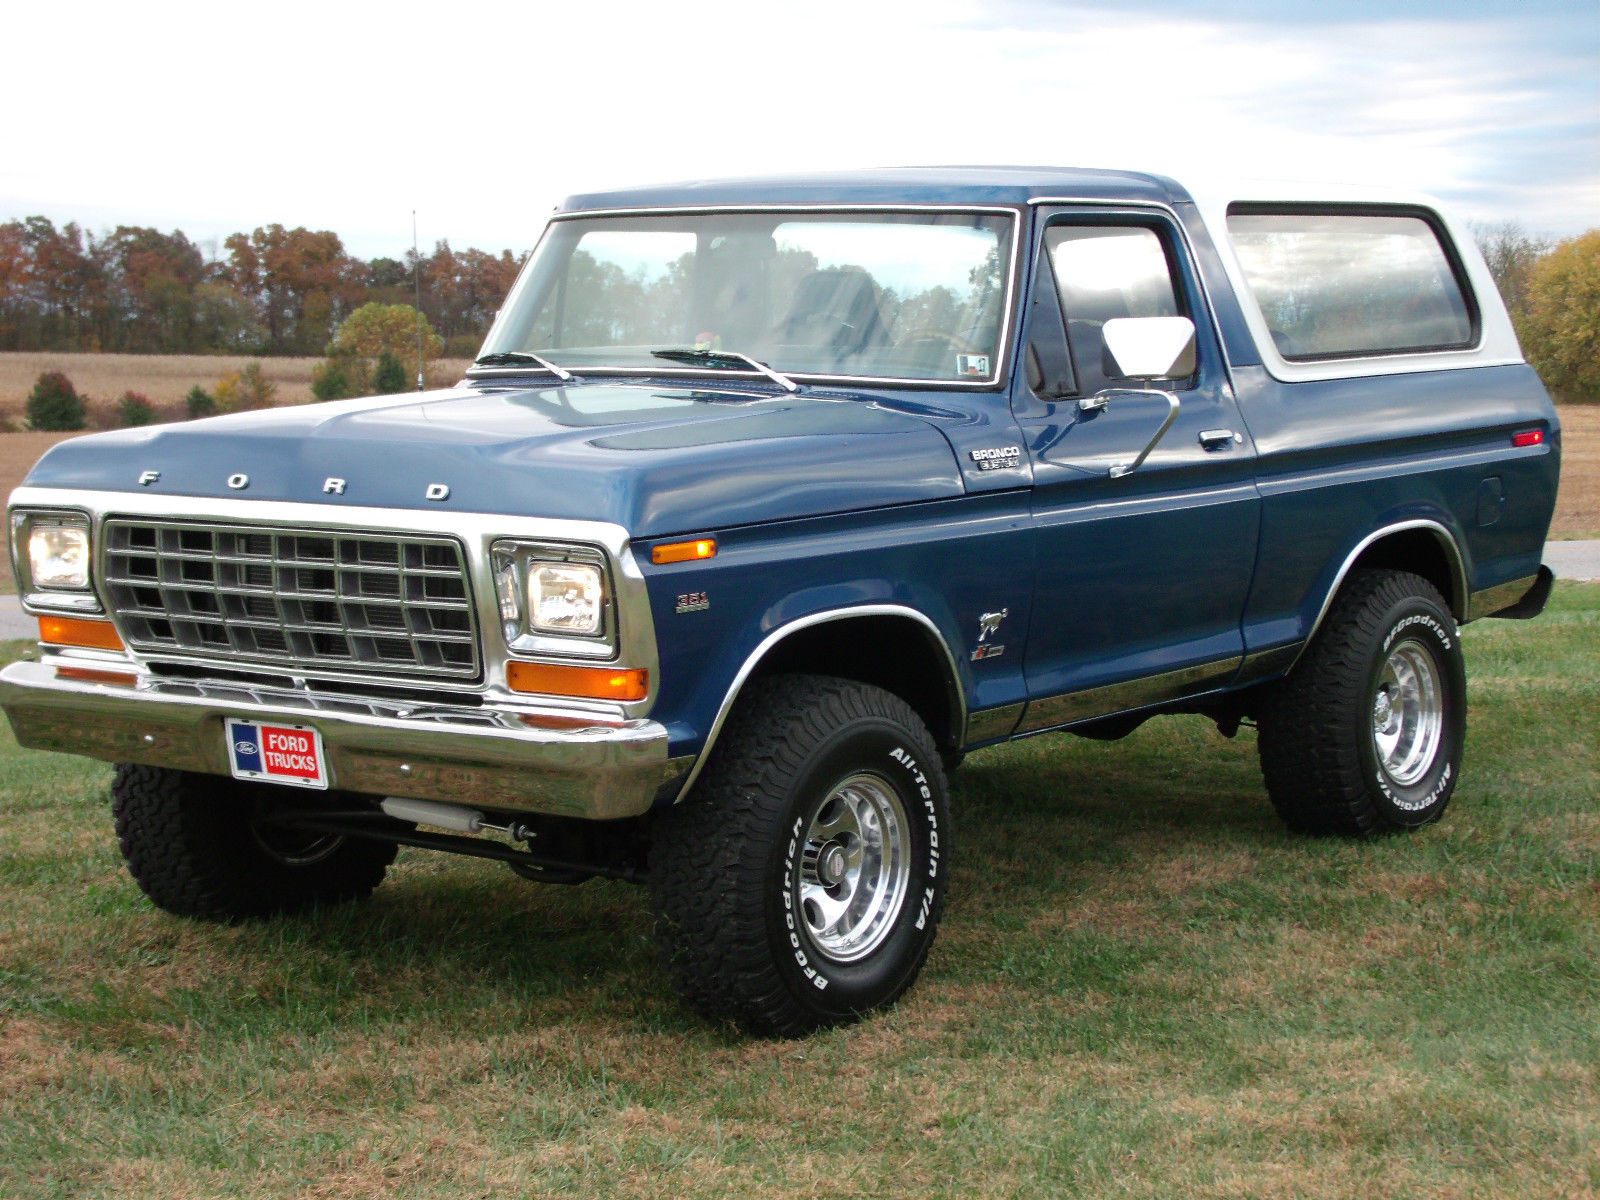 This Big Blue 1979 Ford Bronco is Waiting For You!  FordTrucks.com